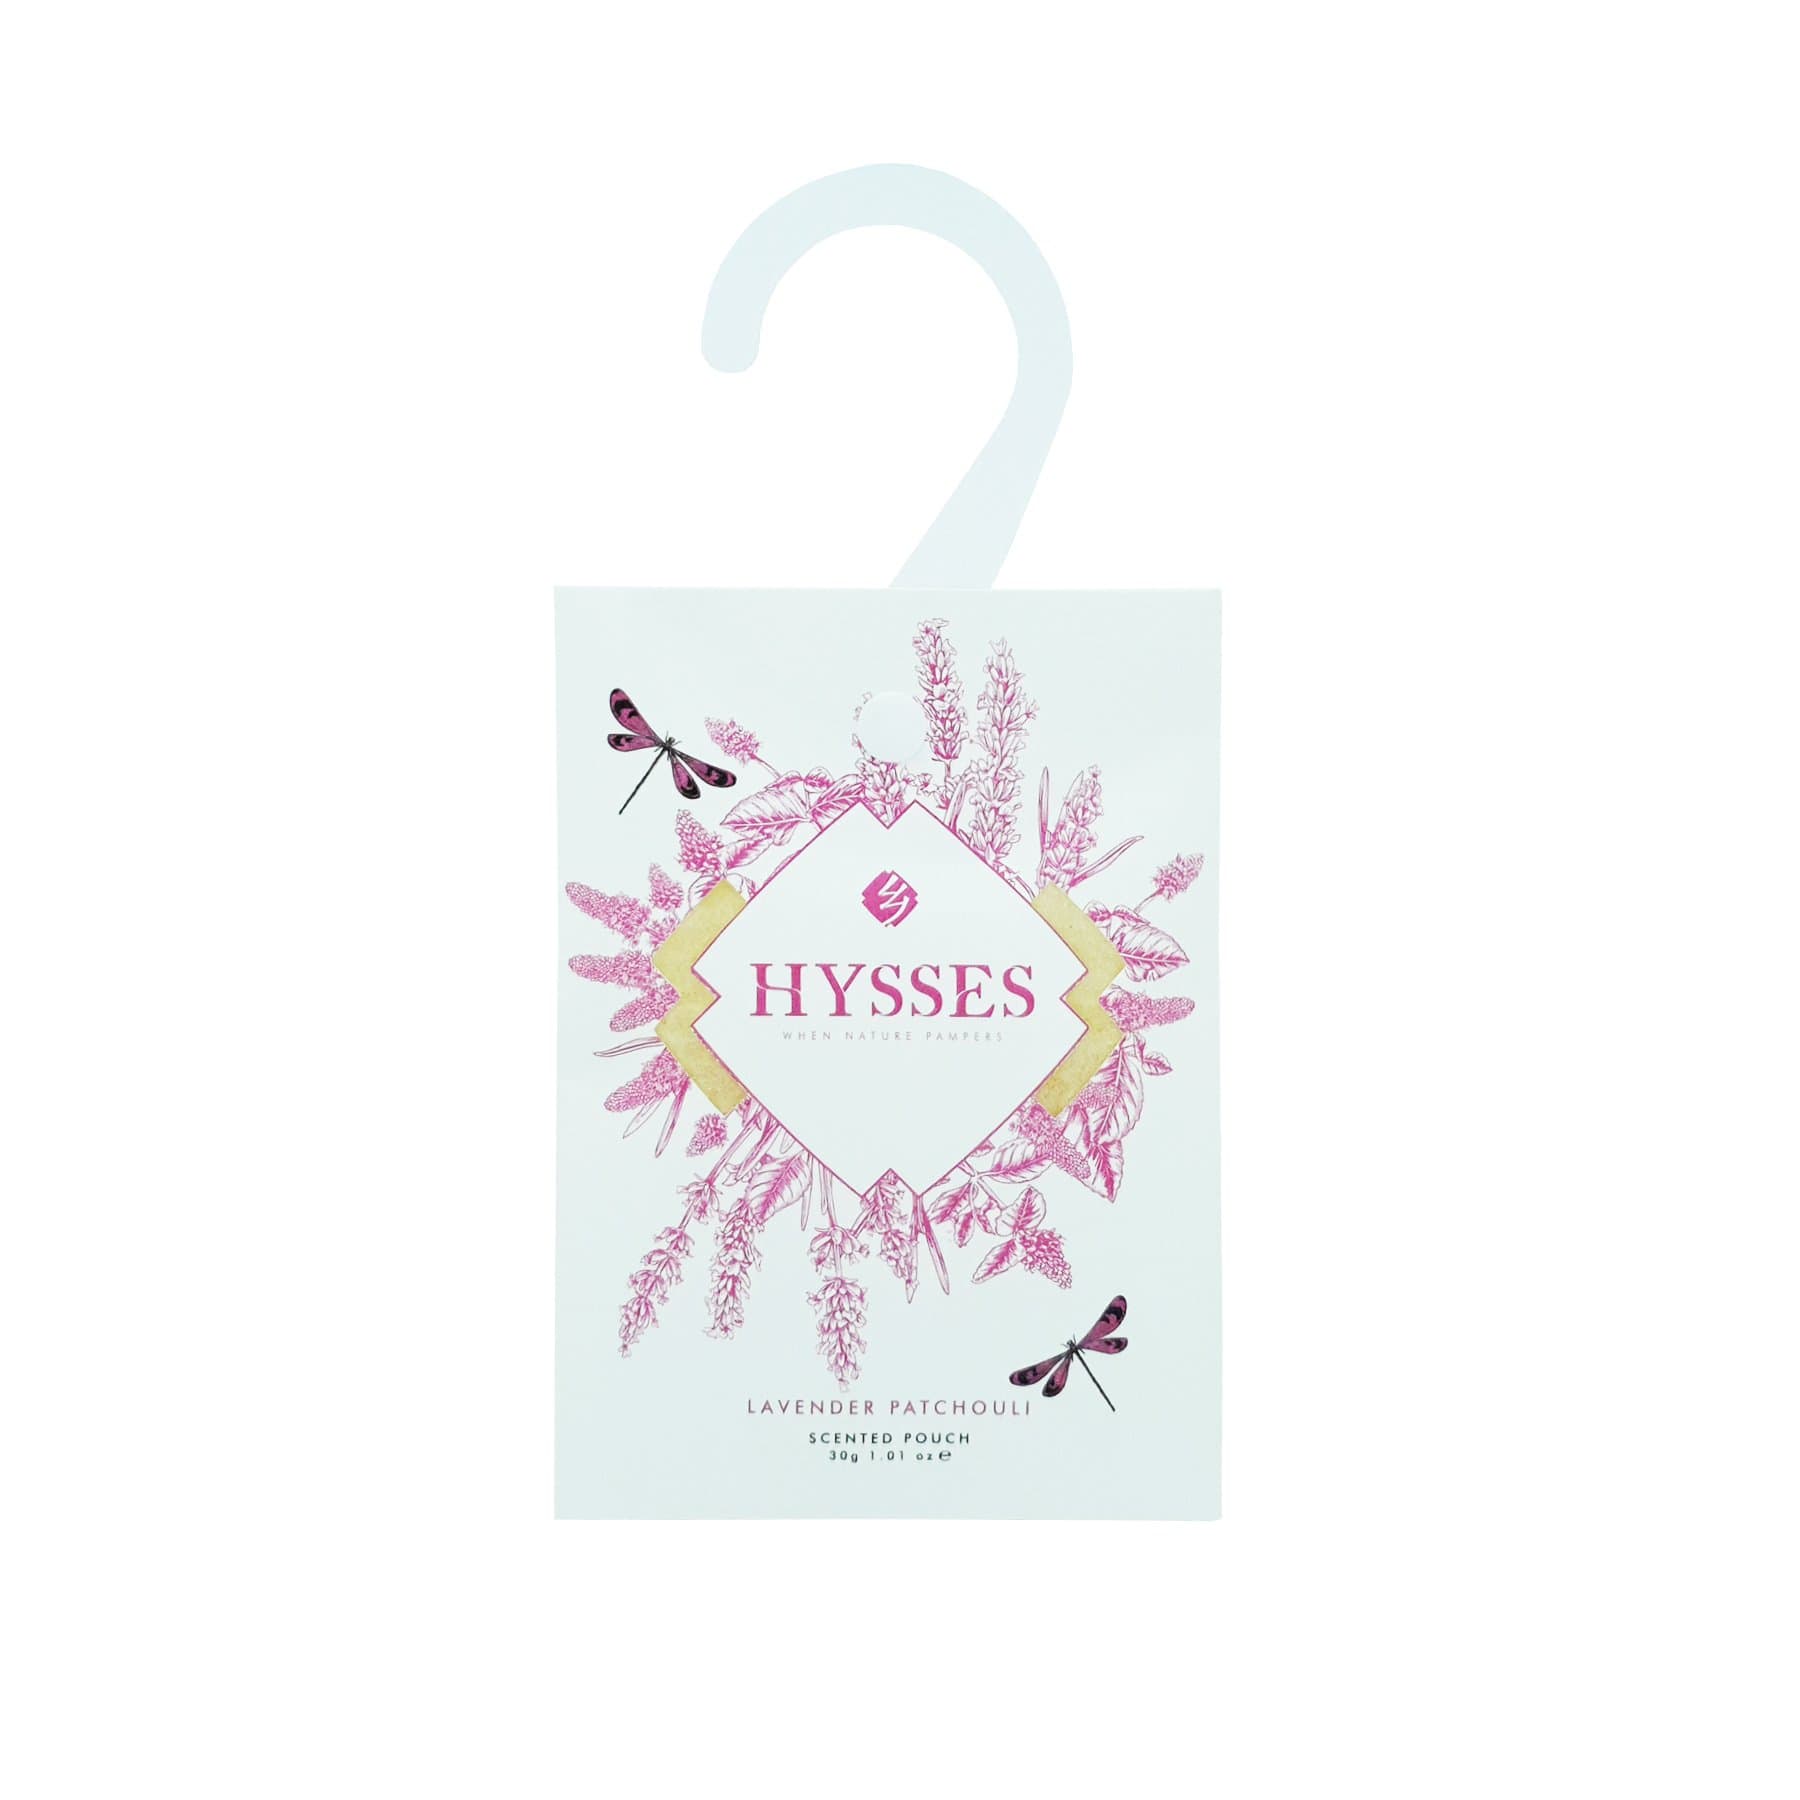 Hysses Home Scents Scented Pouch, Lavender Patchouli